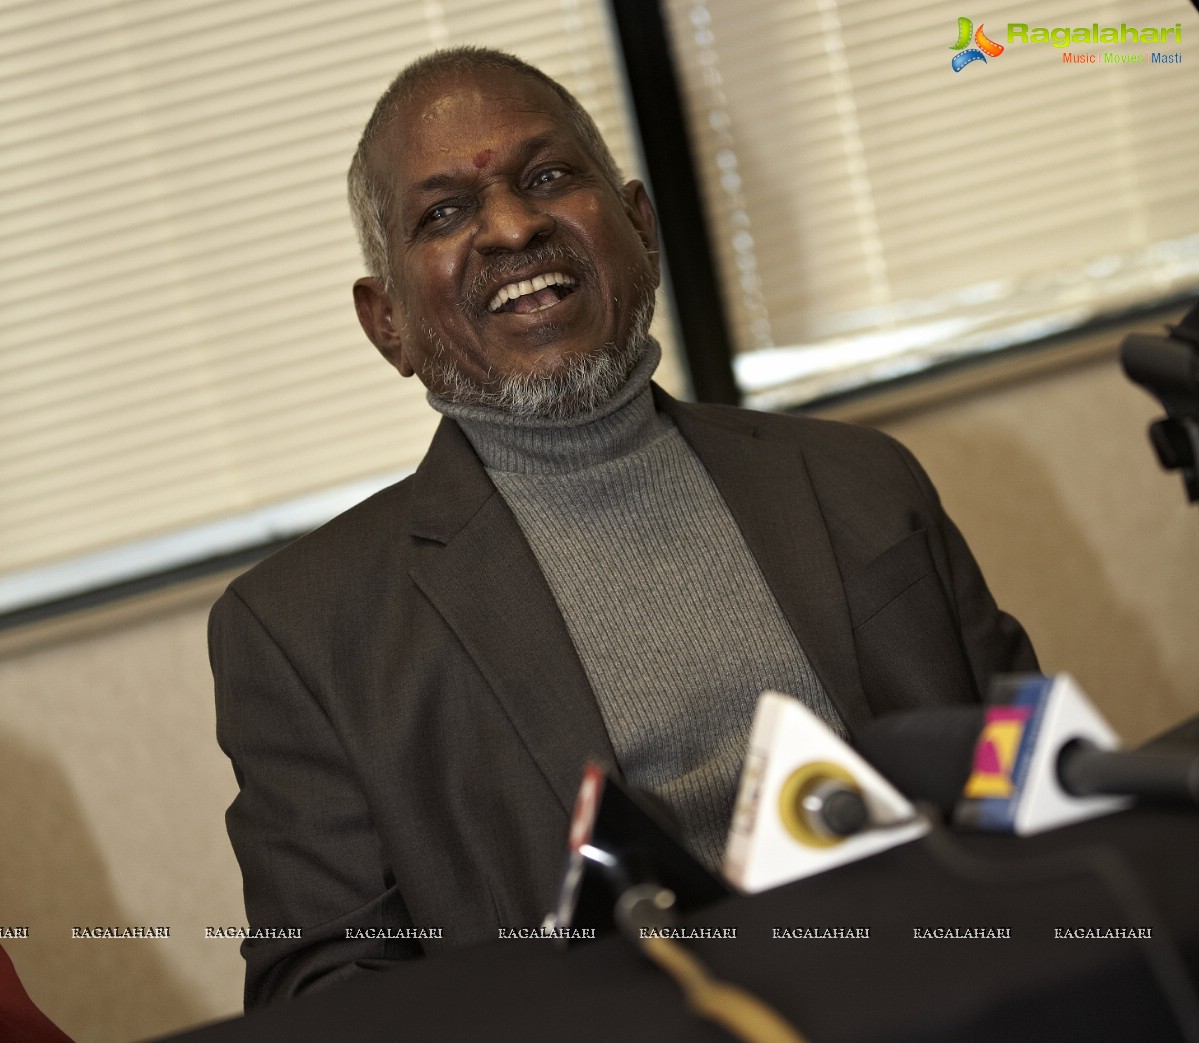 Ilayaraja's Live in Concert in New Jersey - Press Meet by iDream Media